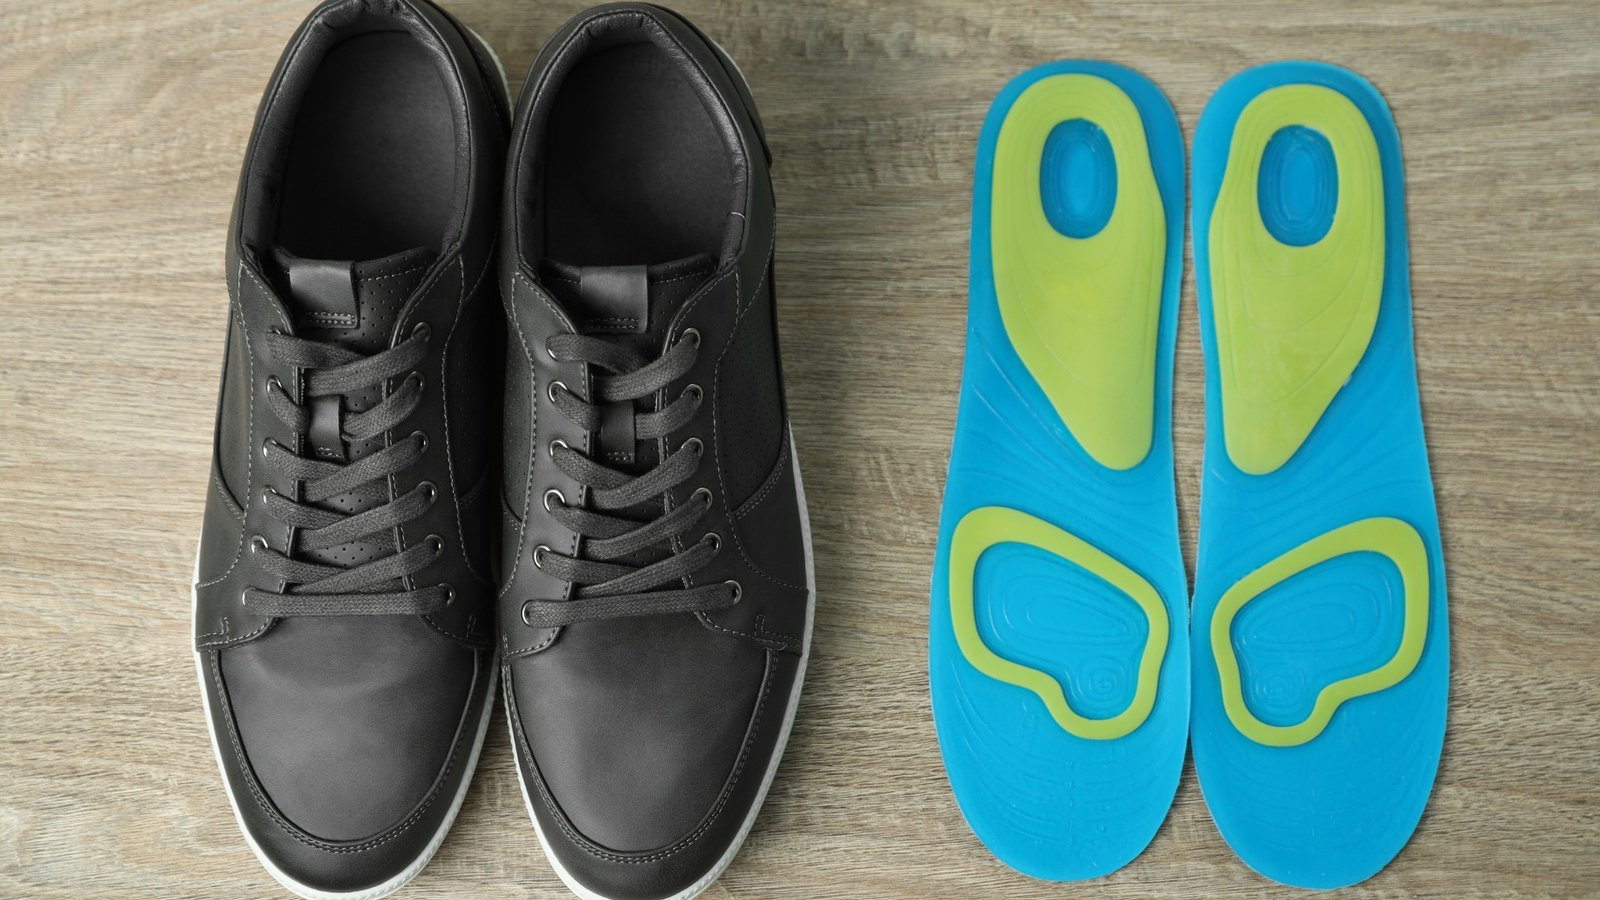 sneakers with orthopedic insoles